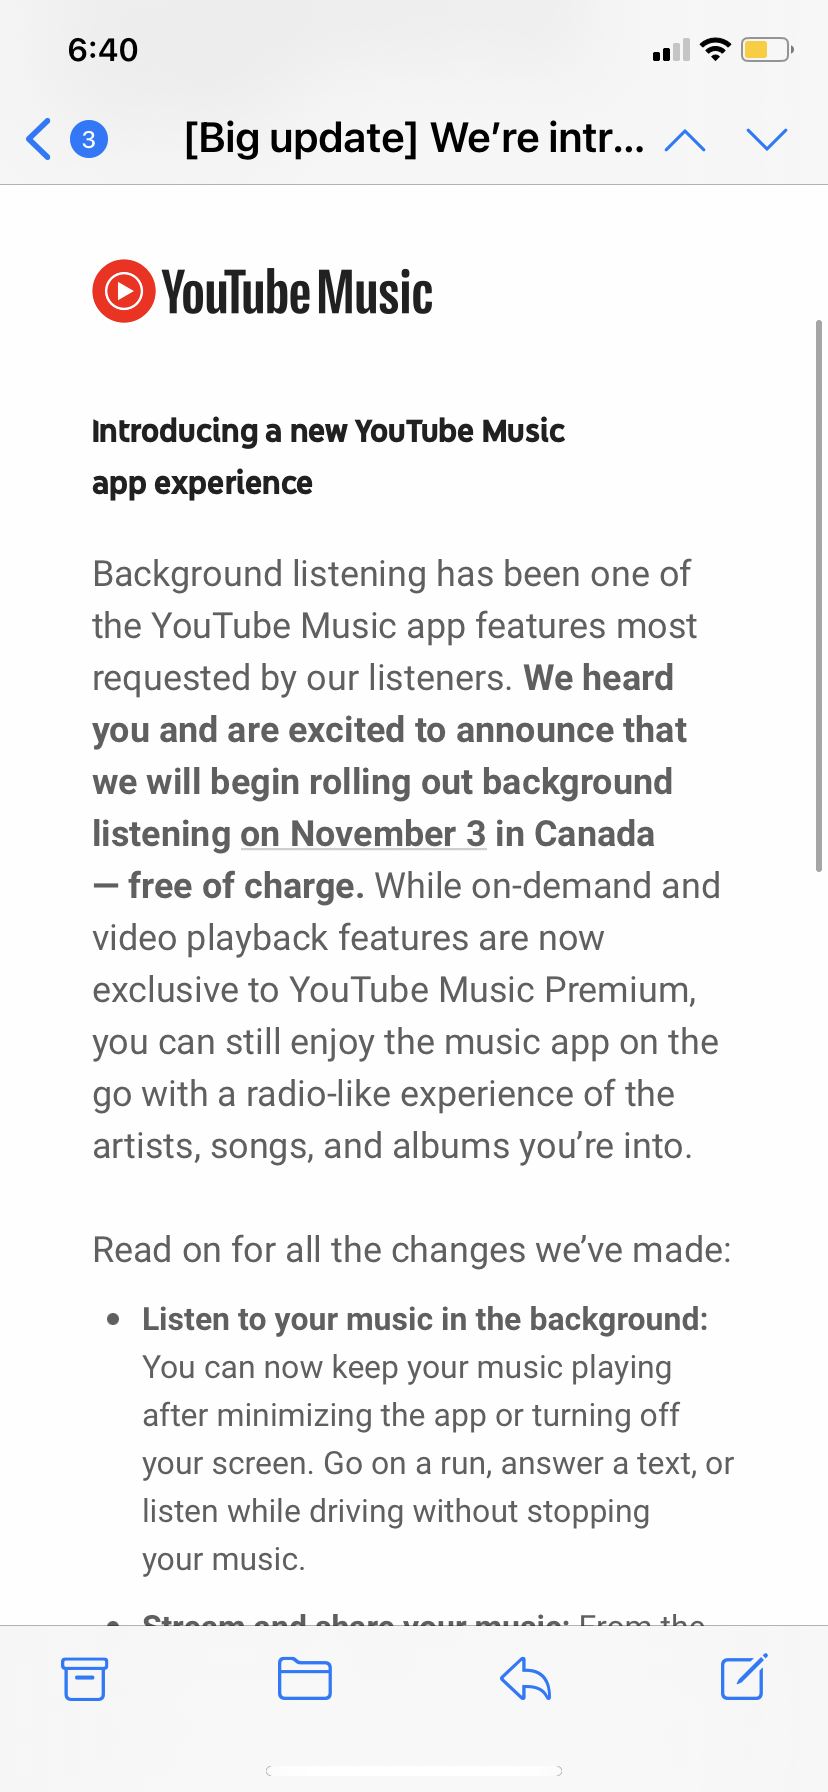 I received an email saying background listening is now free of charge as of  Nov 3. It's not working? - YouTube Music Community